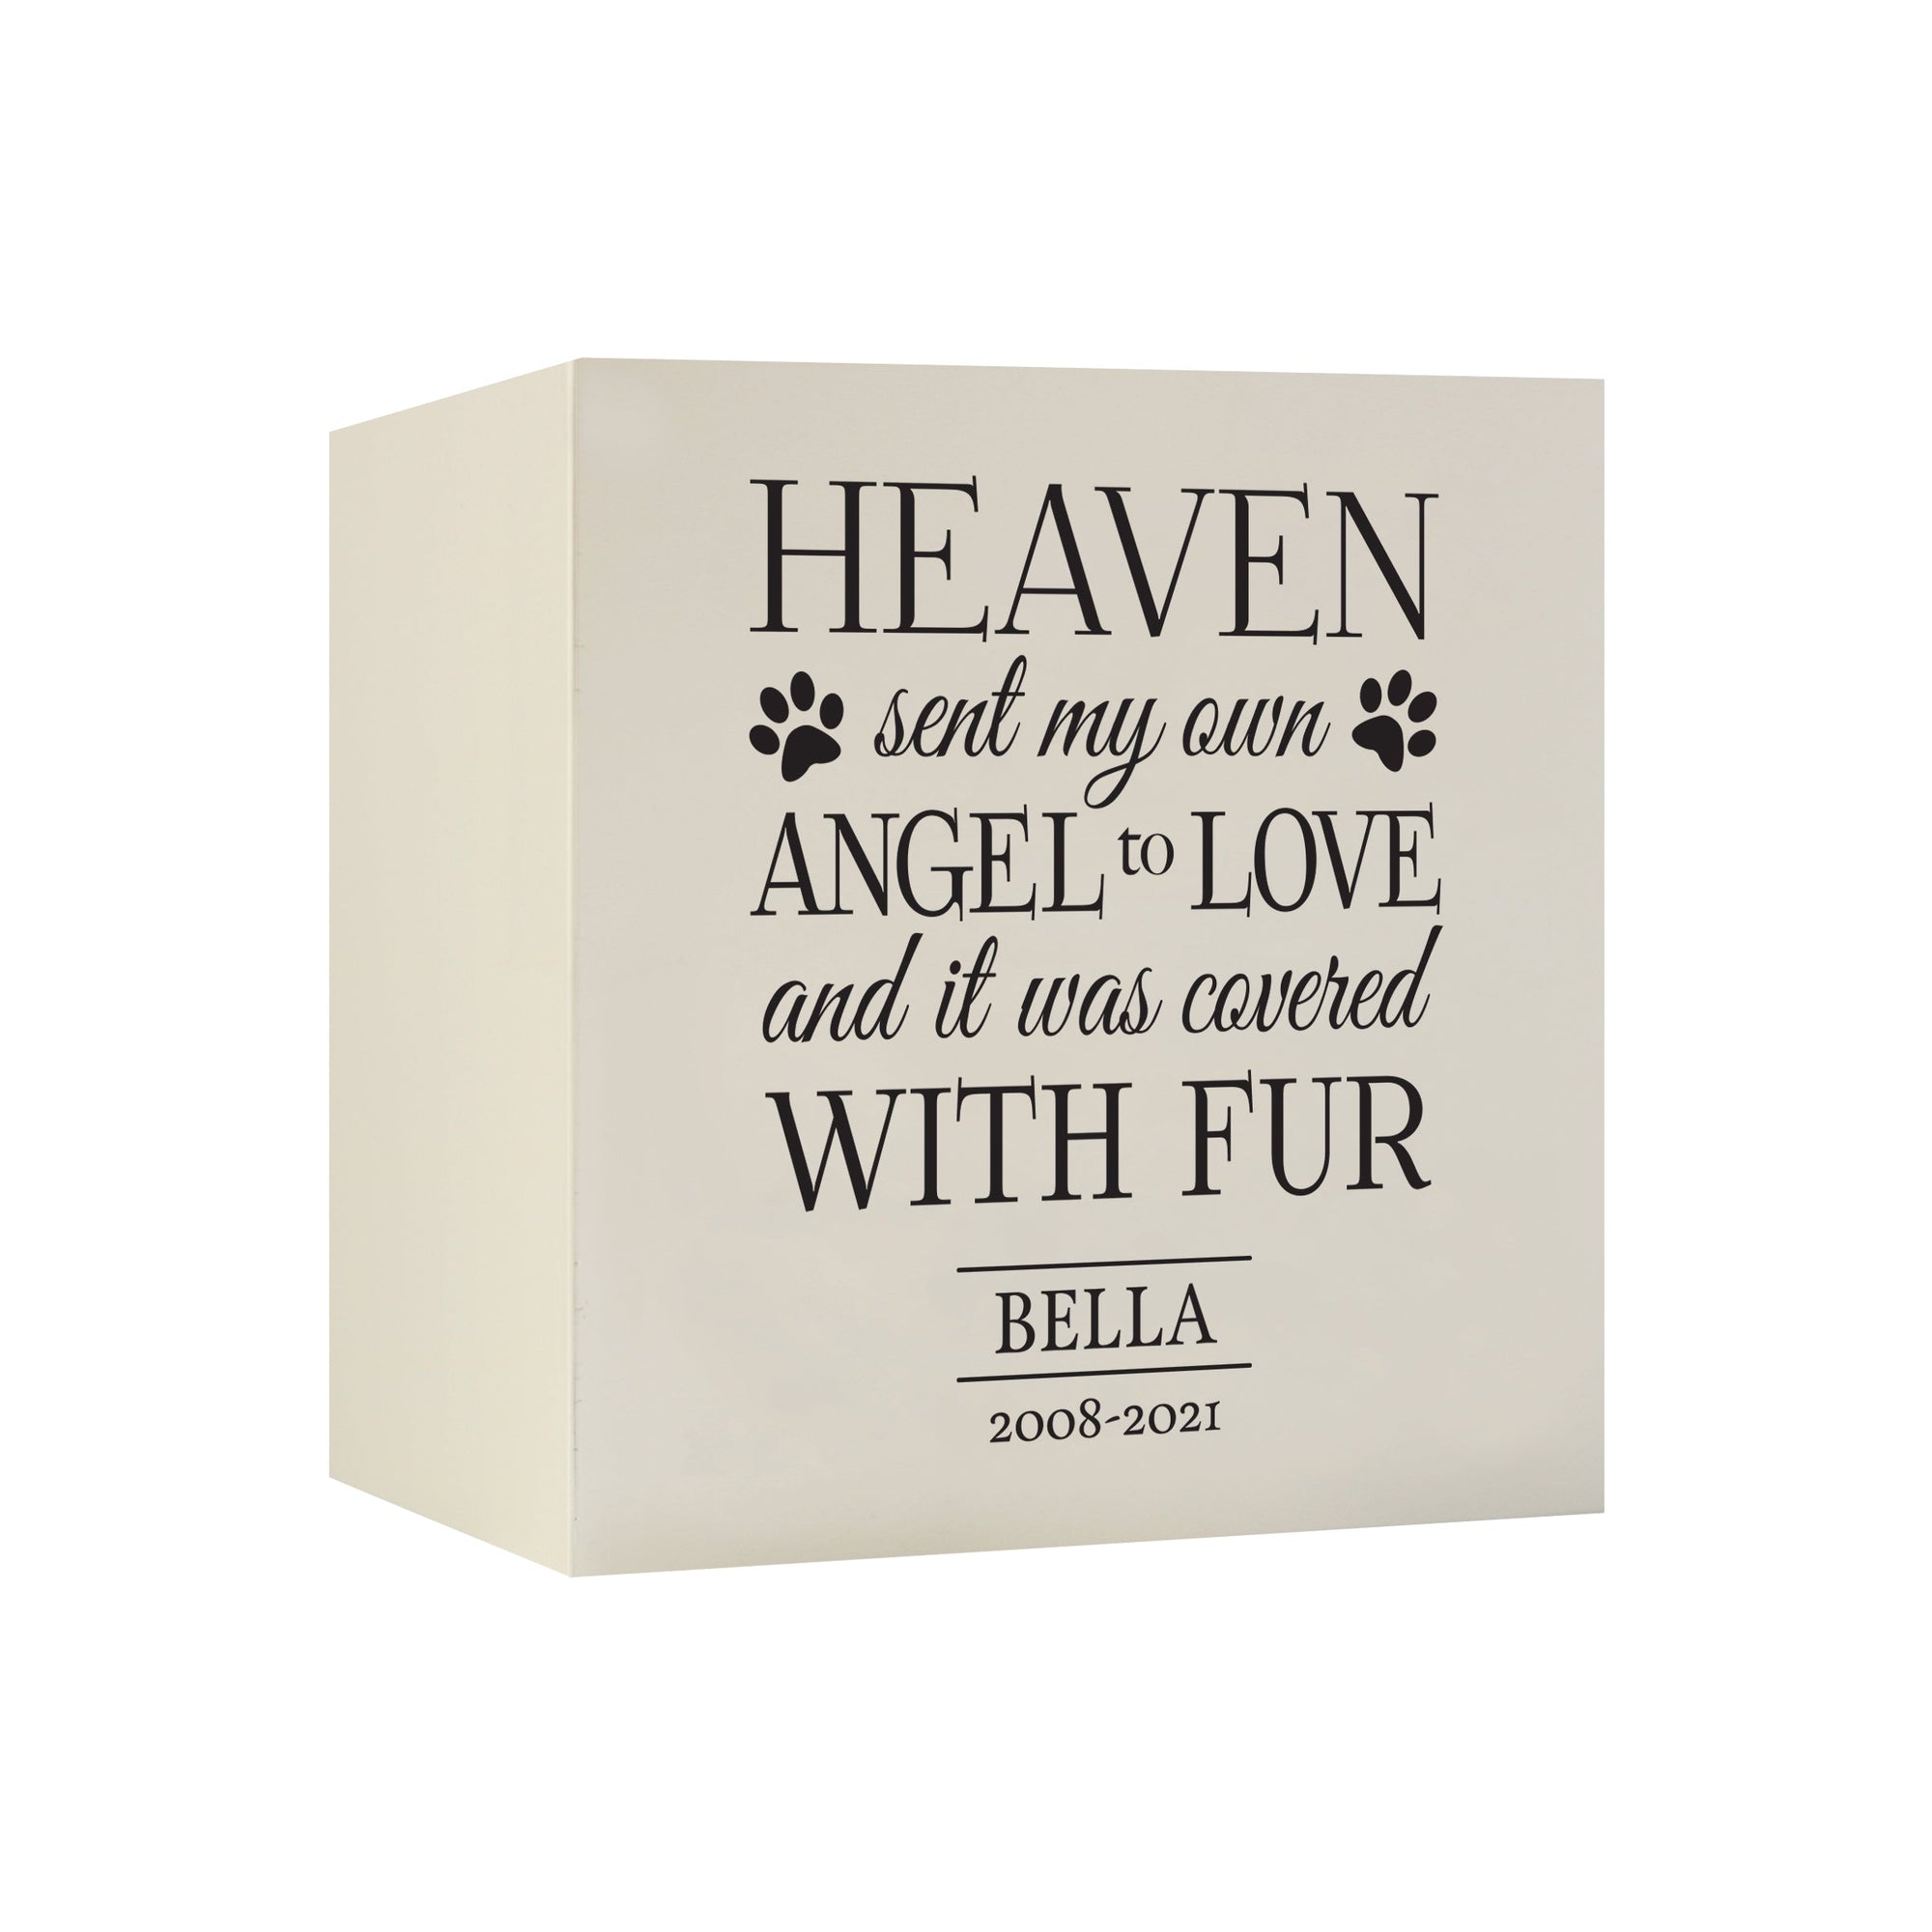 Pet Memorial Shadow Box Cremation Urn for Dog or Cat - Heaven Sent My Own Angel